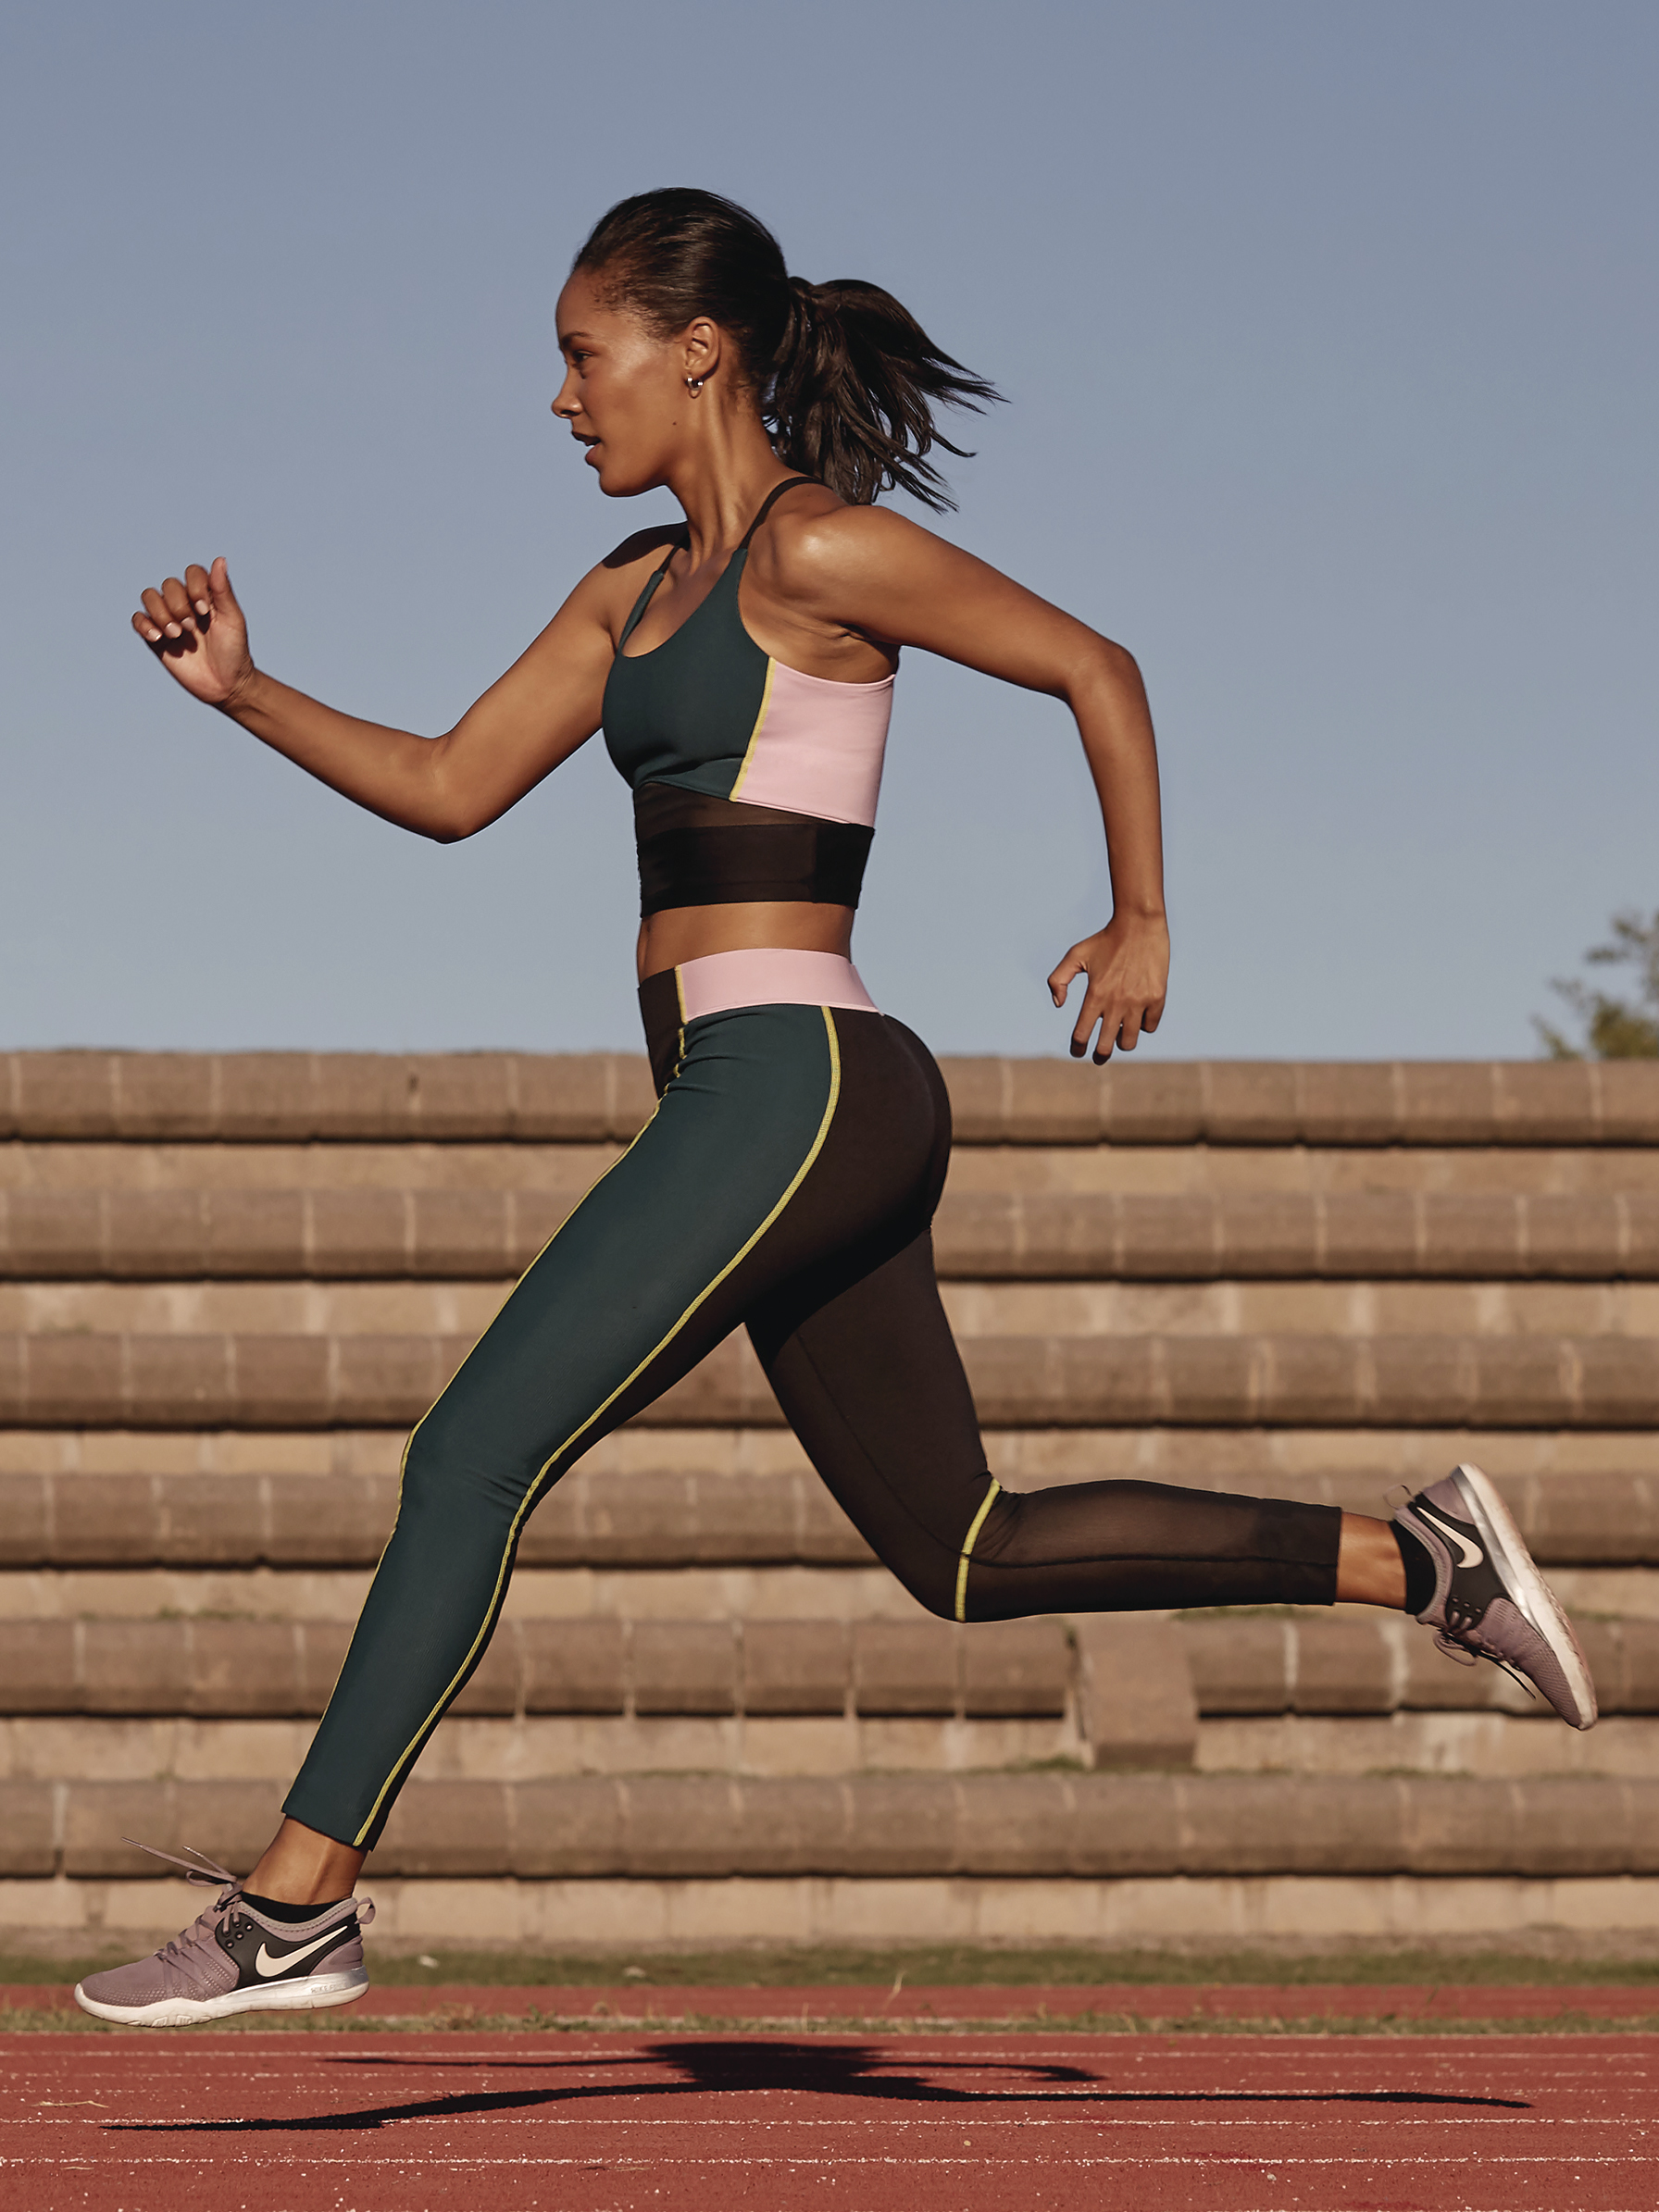 How To Start Running 101: The Tips, Tricks & Hacks To Know